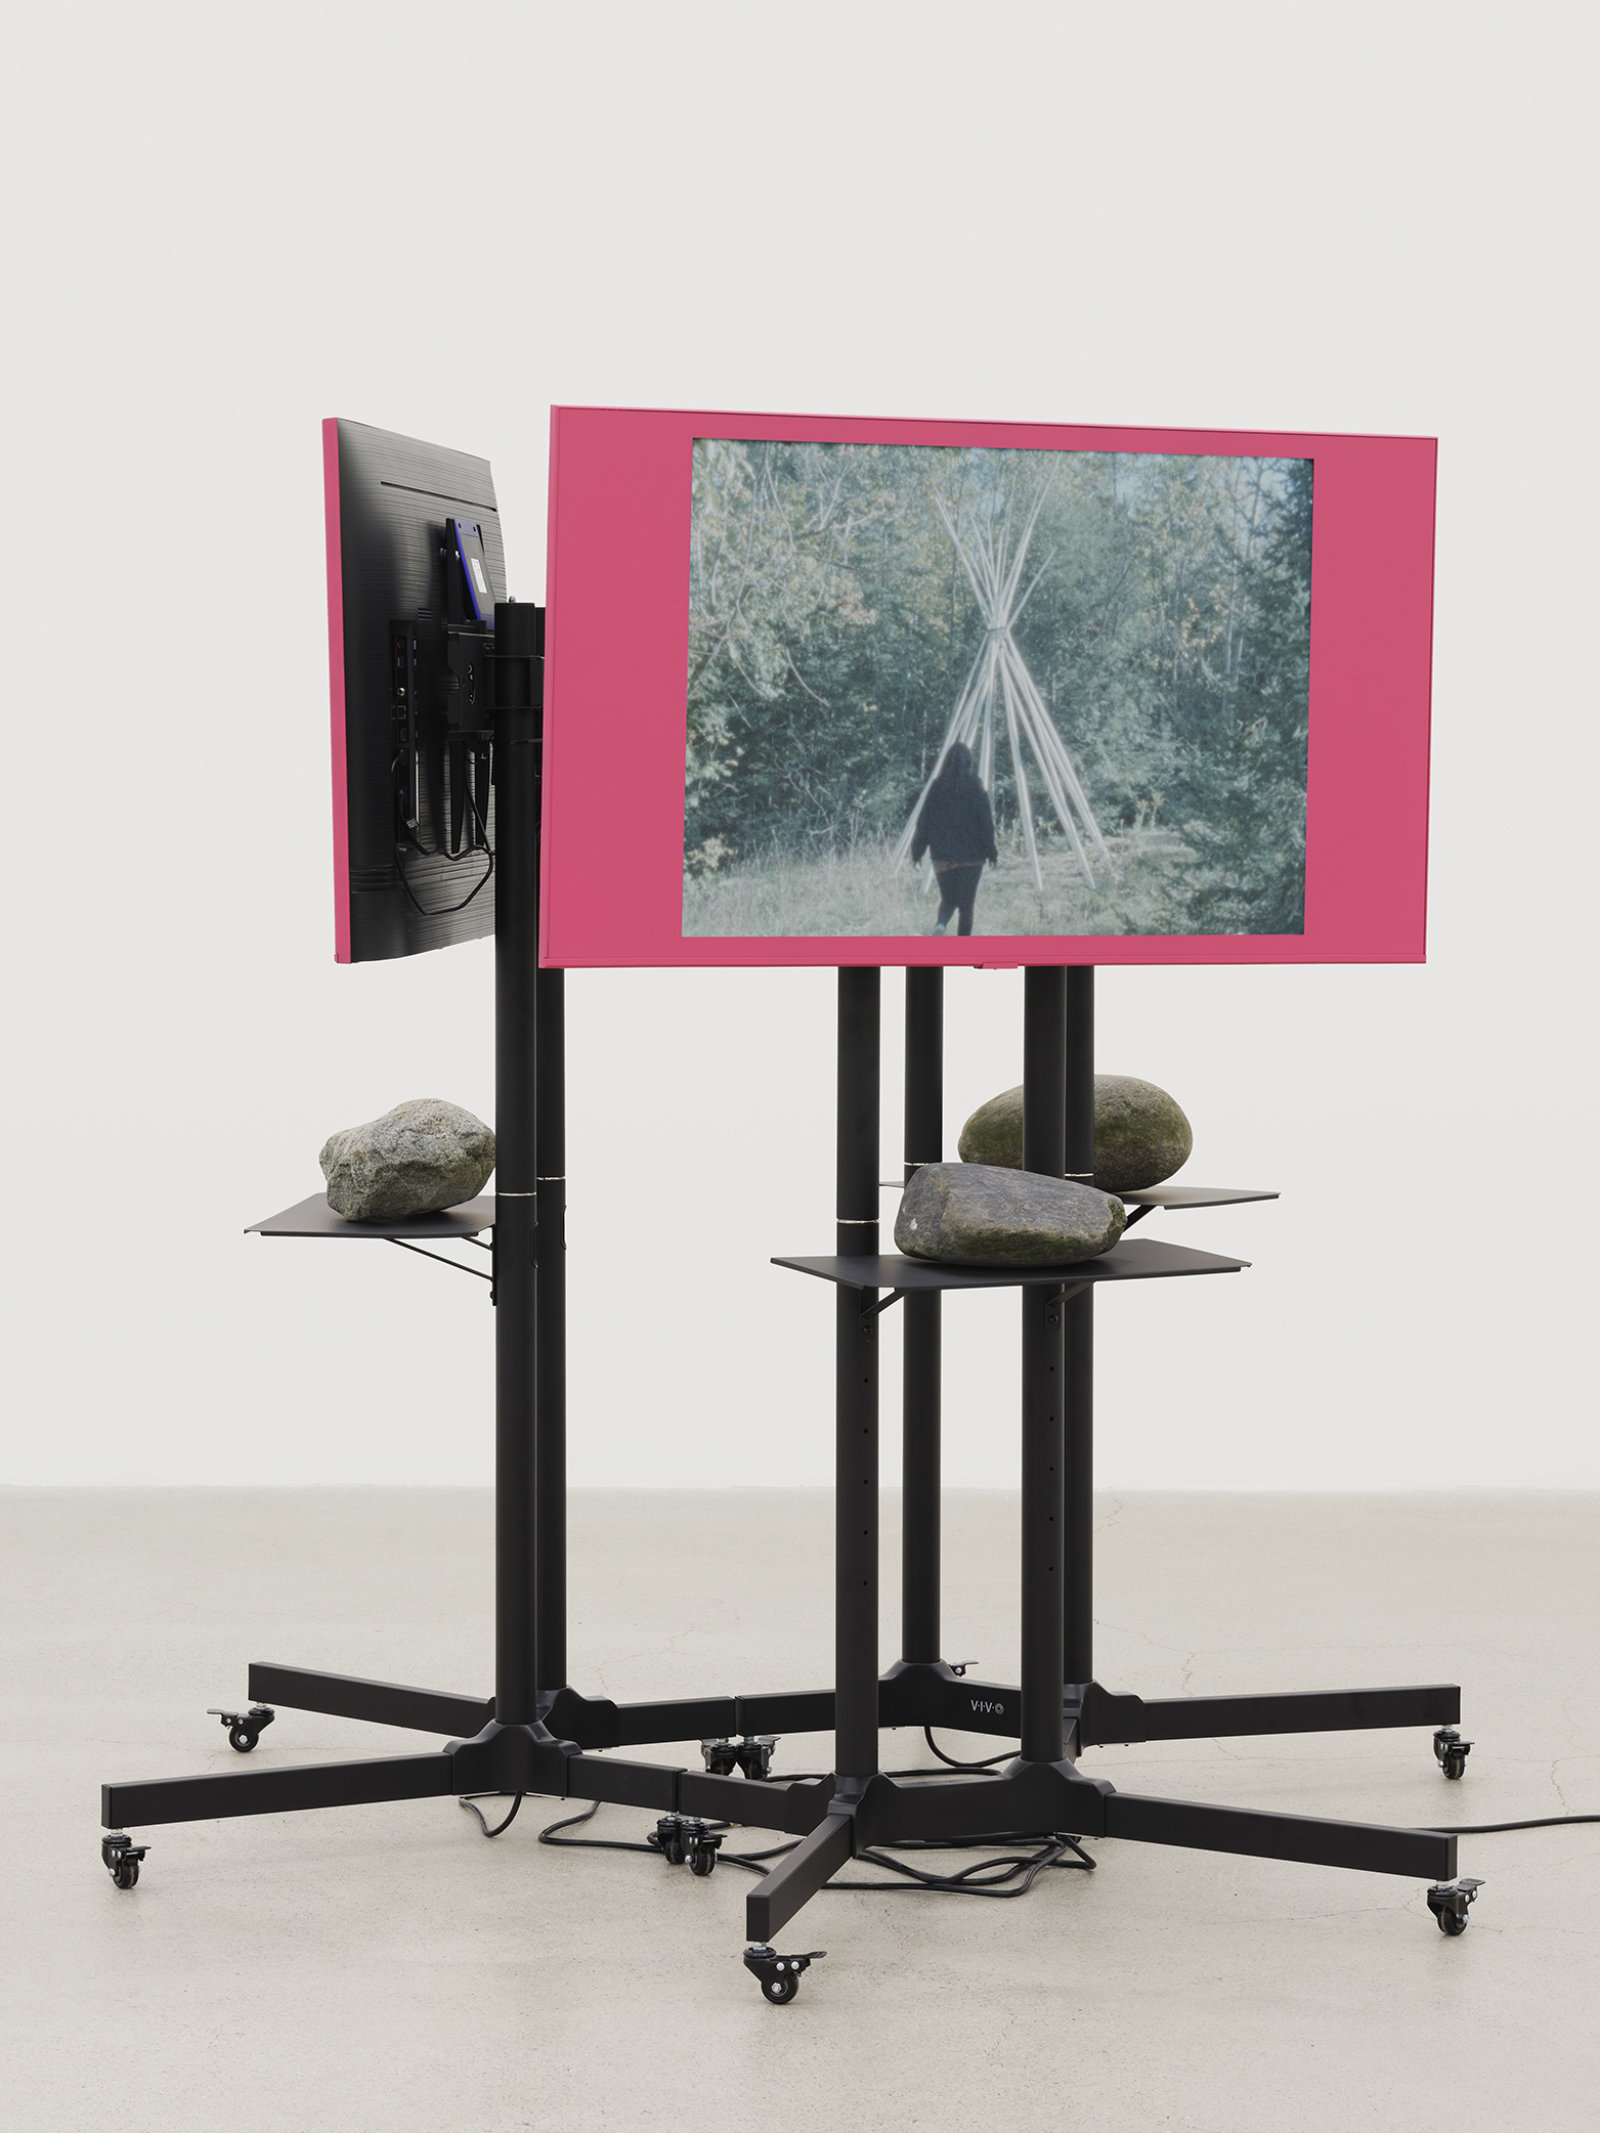 Duane Linklater, primaryuse, 2020, lcd screens, television stands, media players, spray paint, stones, 3 super 8mm film transfers to 2k video with audio, score by eagles with eyes closed, looping: 5 minutes, 19 seconds; 5 minutes, 10 seconds; 5 minutes, 23 seconds; 69 x 72 x 72 in. (175 x 183 x 183 cm)